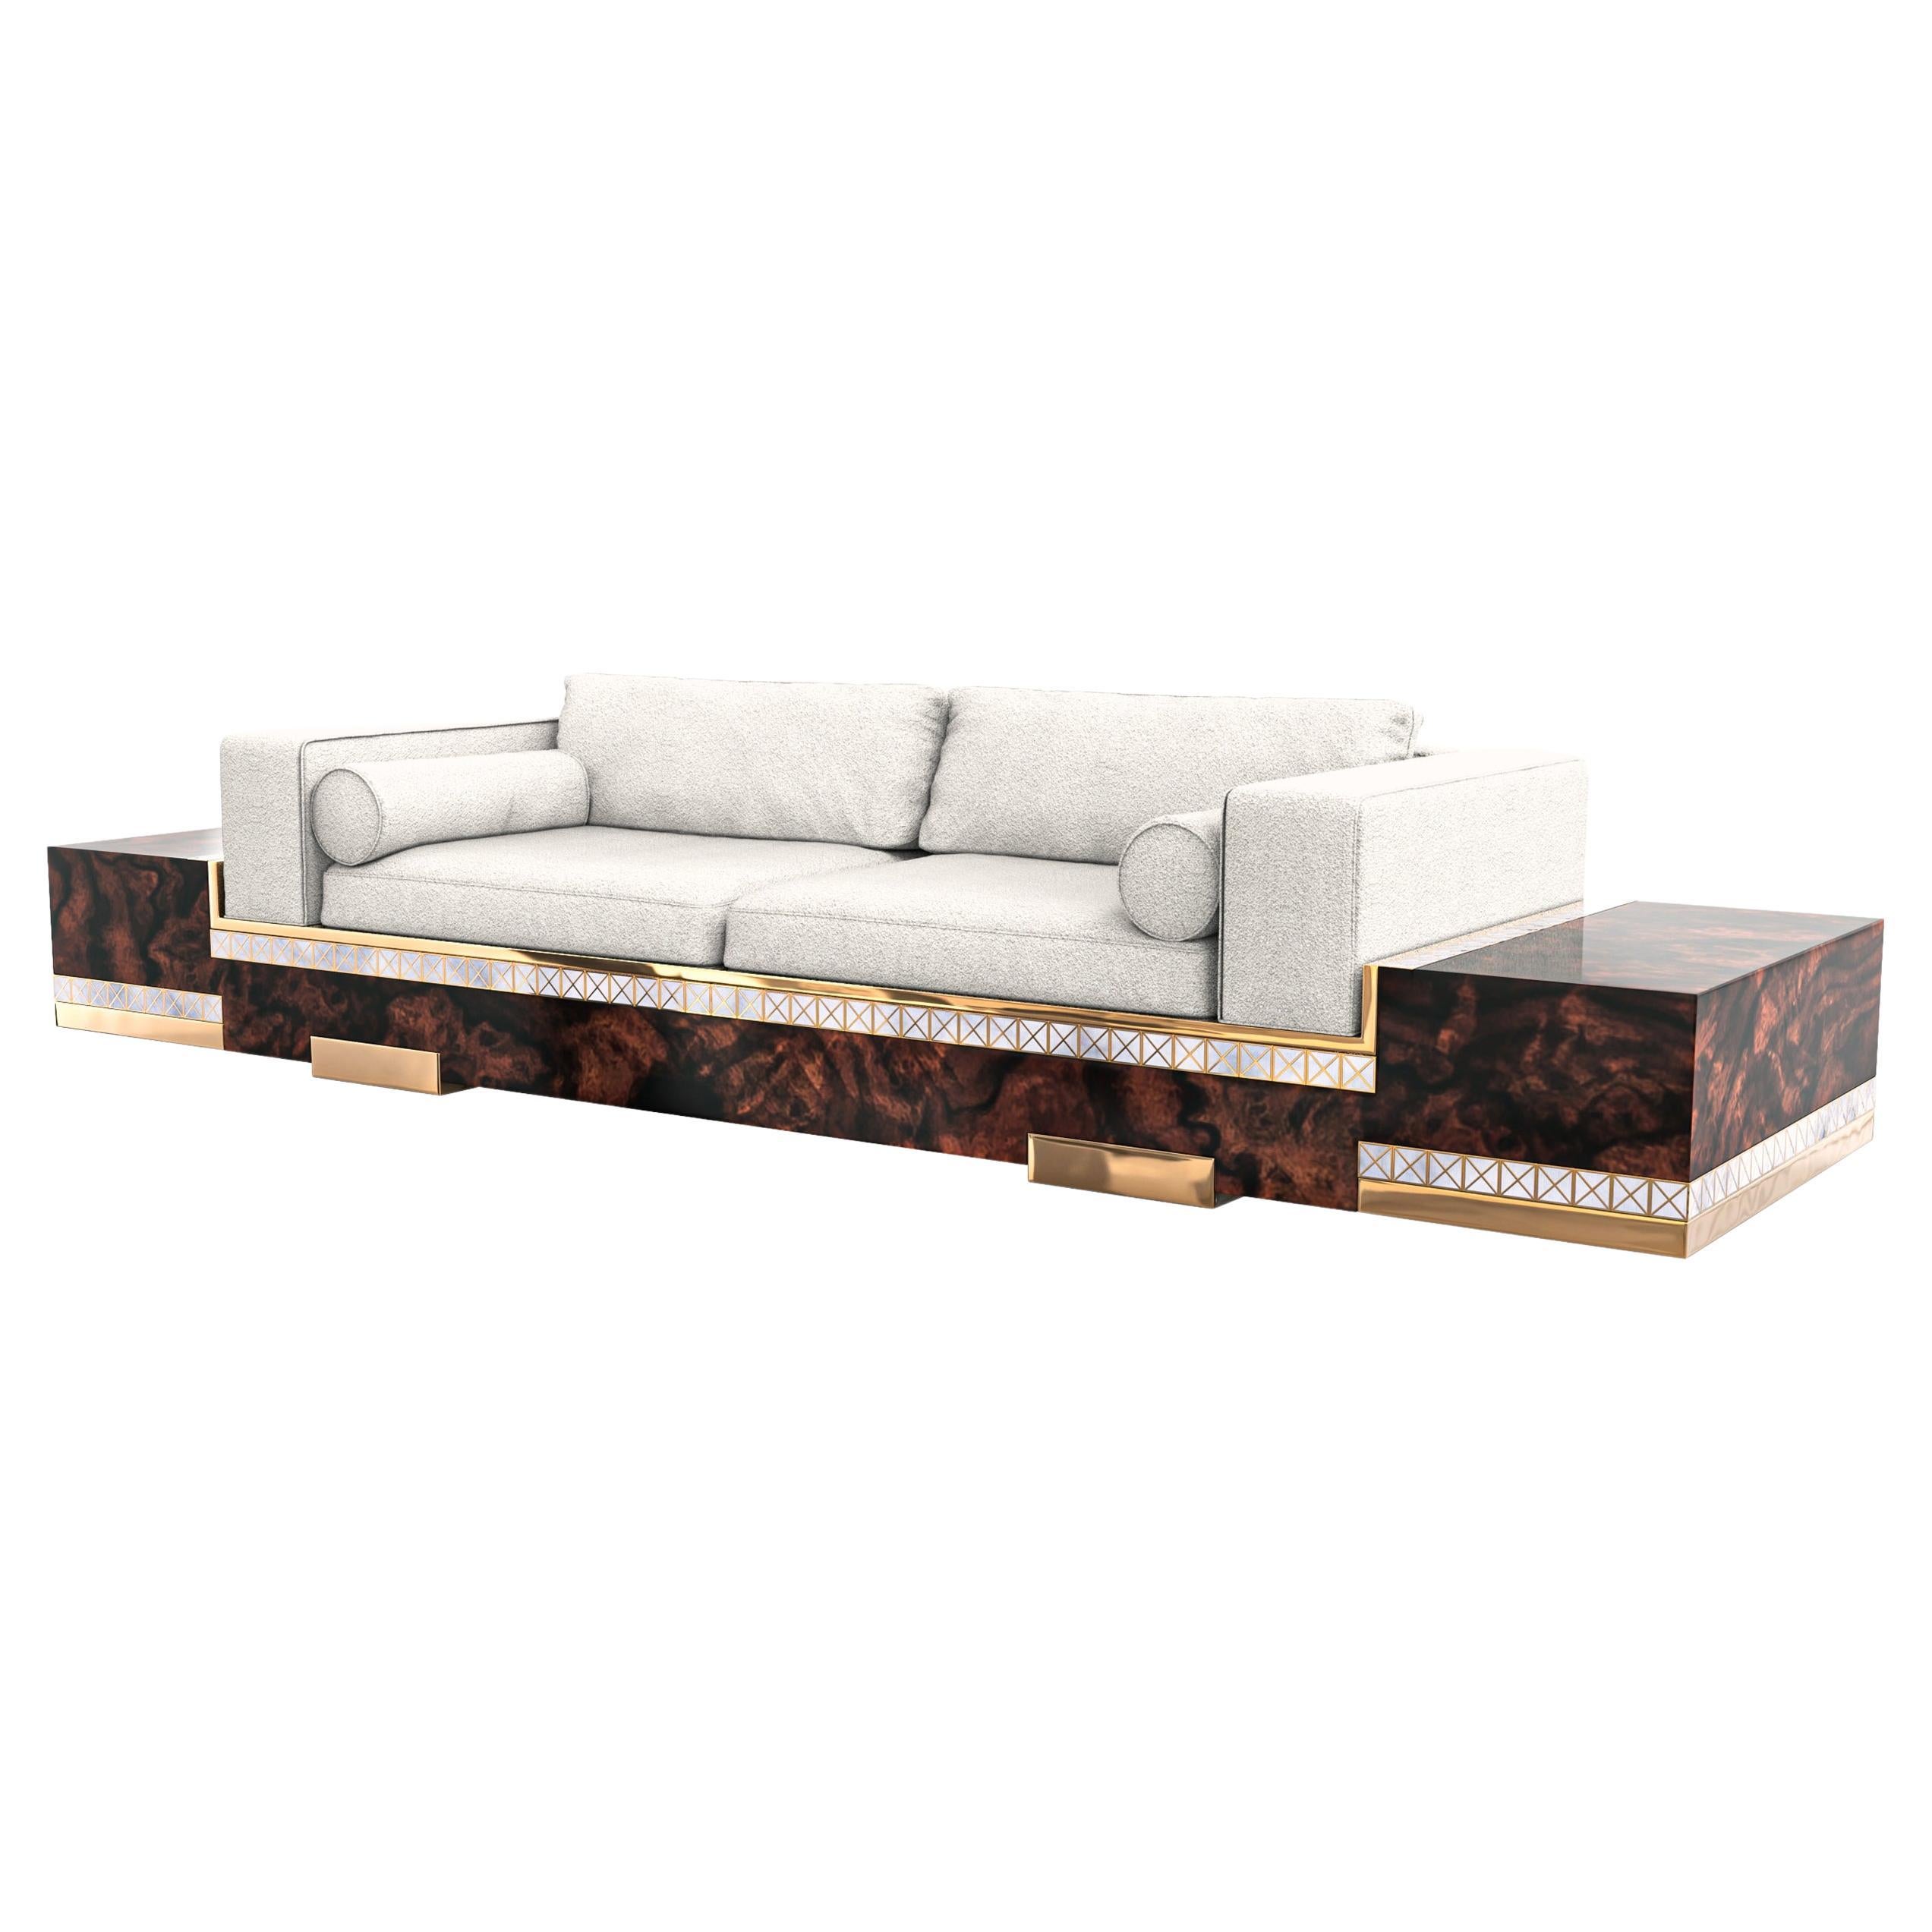 "La Perla Prescelta" Sofa Together With "The Art Of Mother Of Pearl Inlay" For Sale